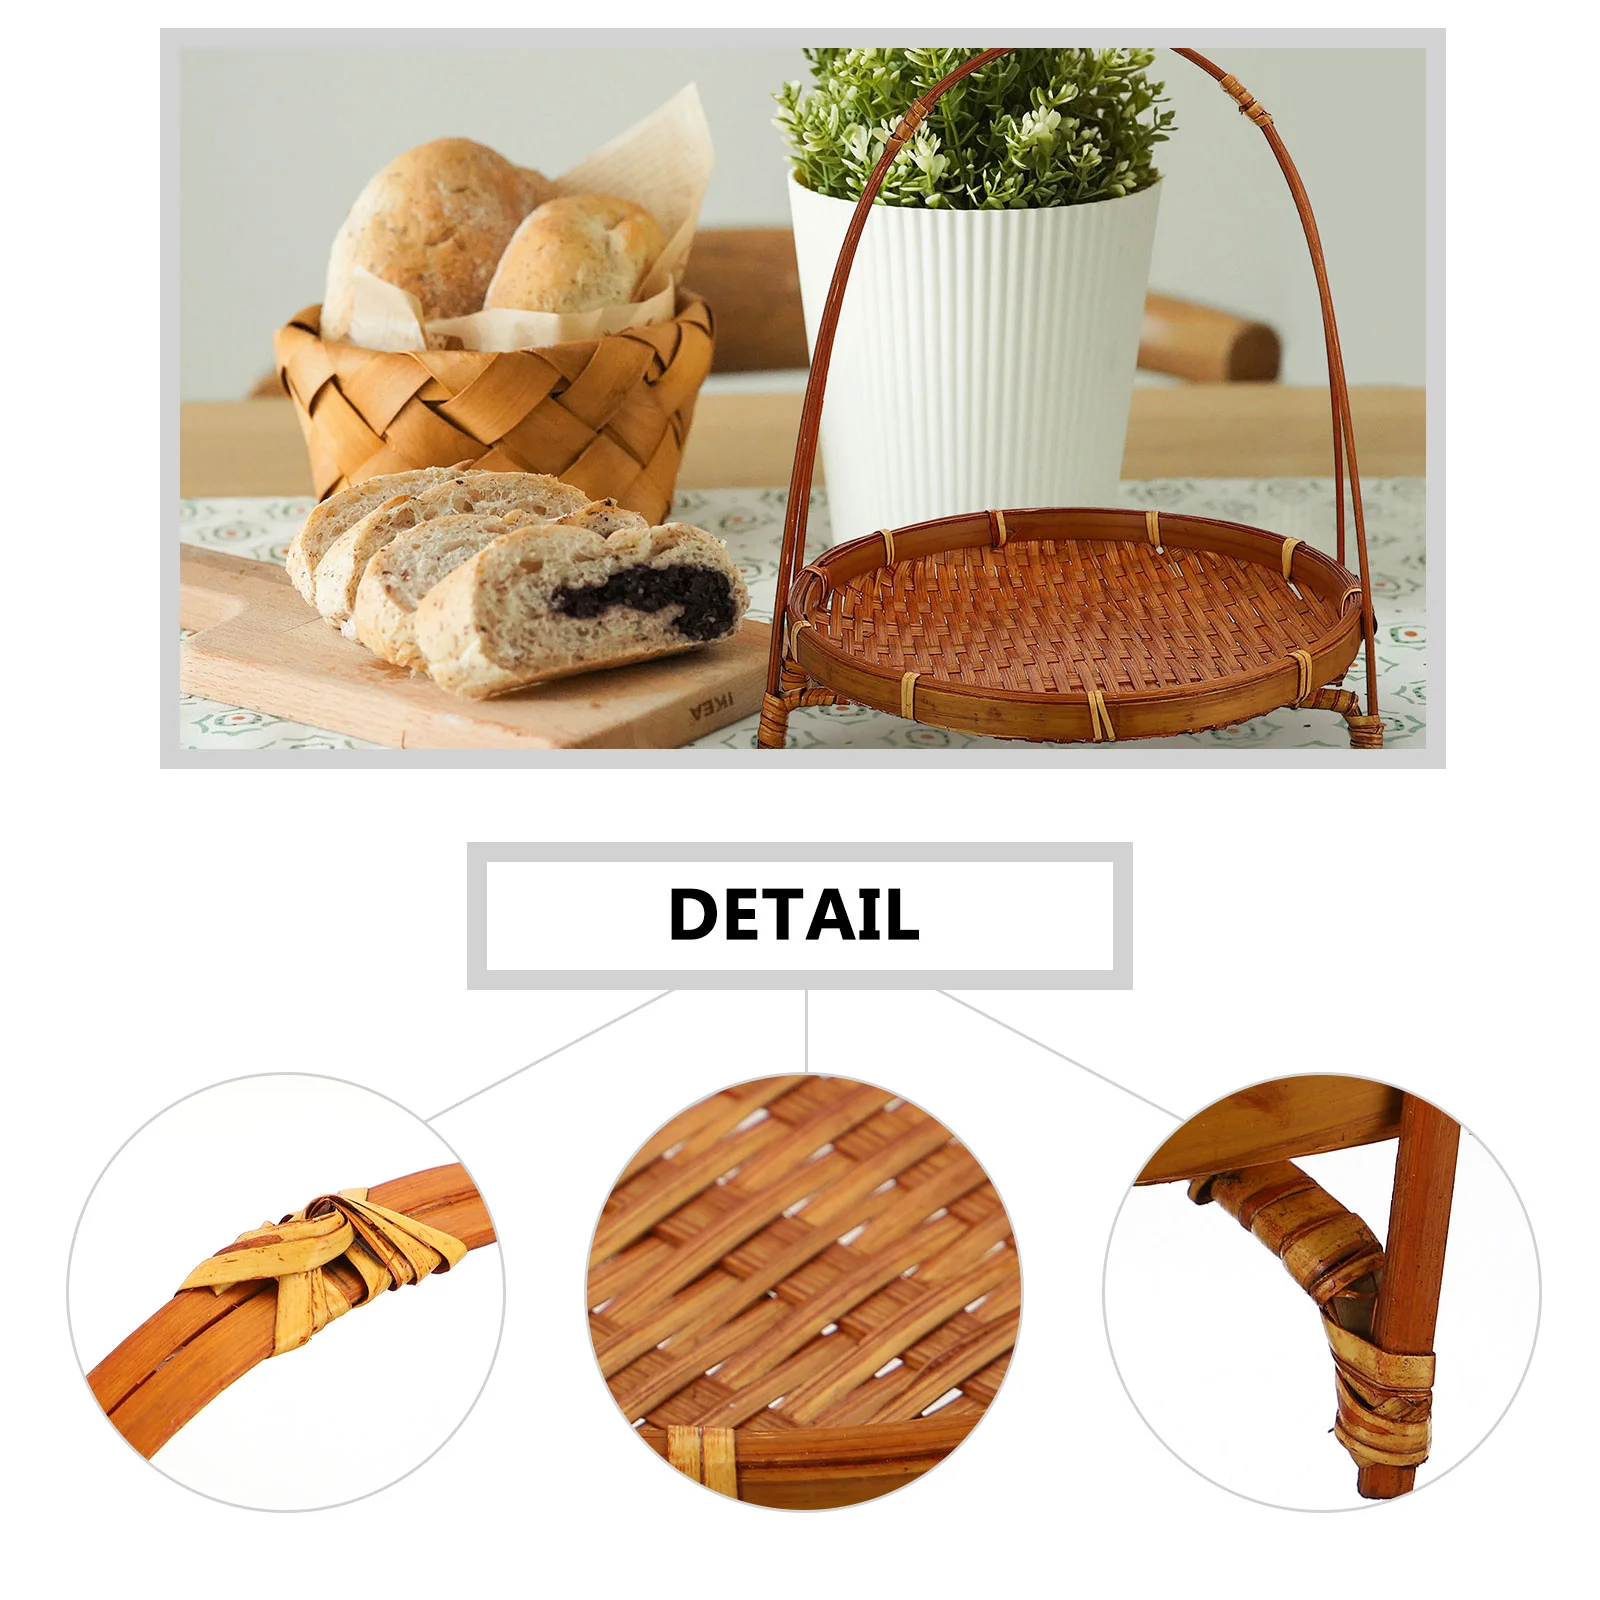 

Basket Bamboo Wicker Fruit Storage Rattan Woven Picnic Serving Dessert Bread Tray Candy Handle Baskets Rustic Picnic basket